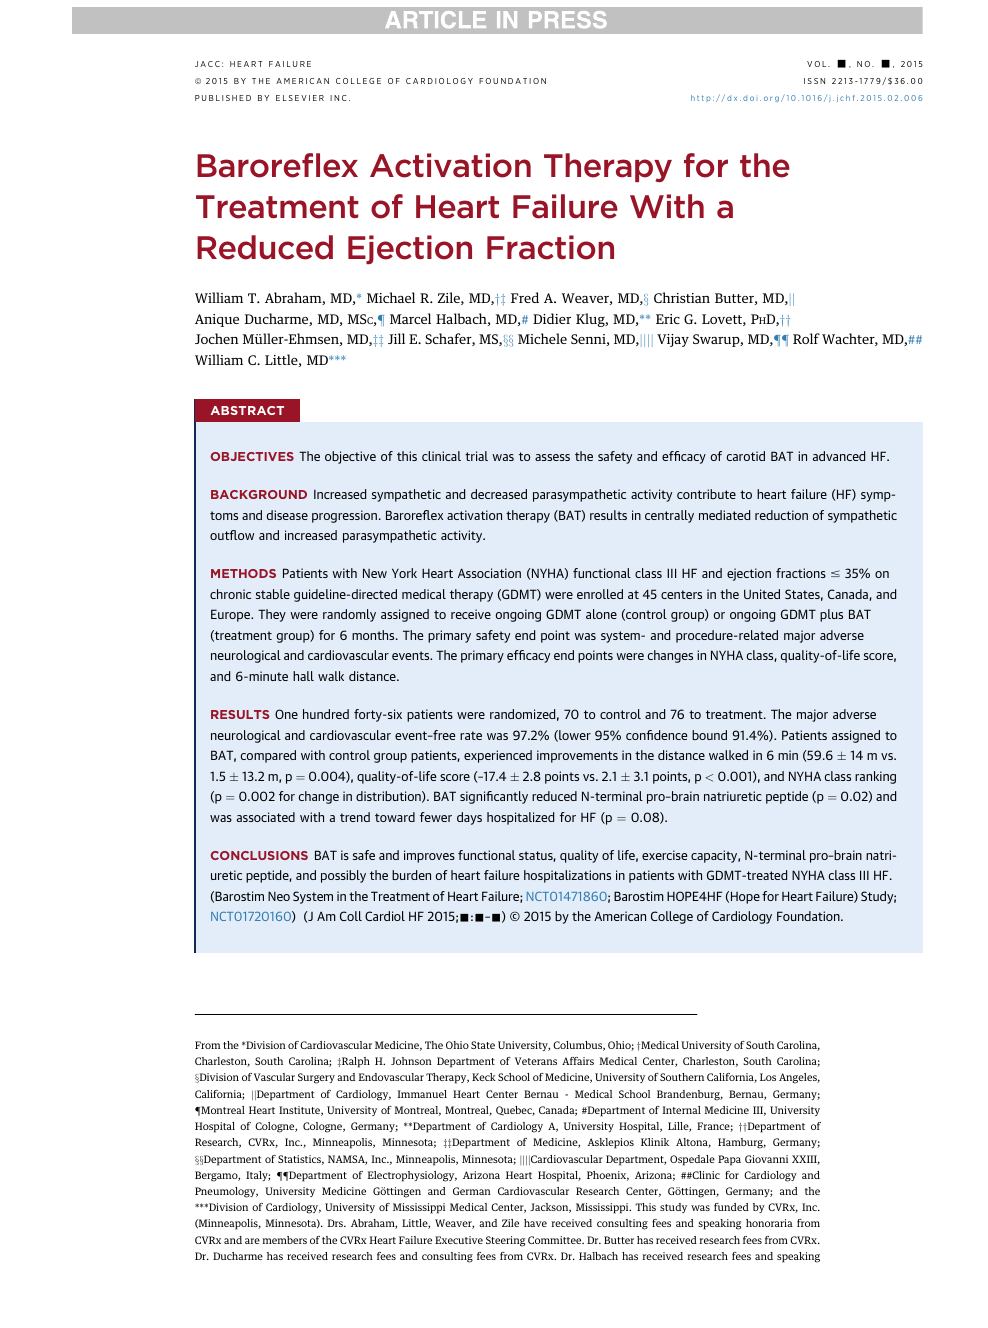 Baroreflex Activation Therapy For The Treatment Of Heart Failure With A Reduced Ejection Fraction Topic Of Research Paper In Clinical Medicine Download Scholarly Article Pdf And Read For Free On Cyberleninka